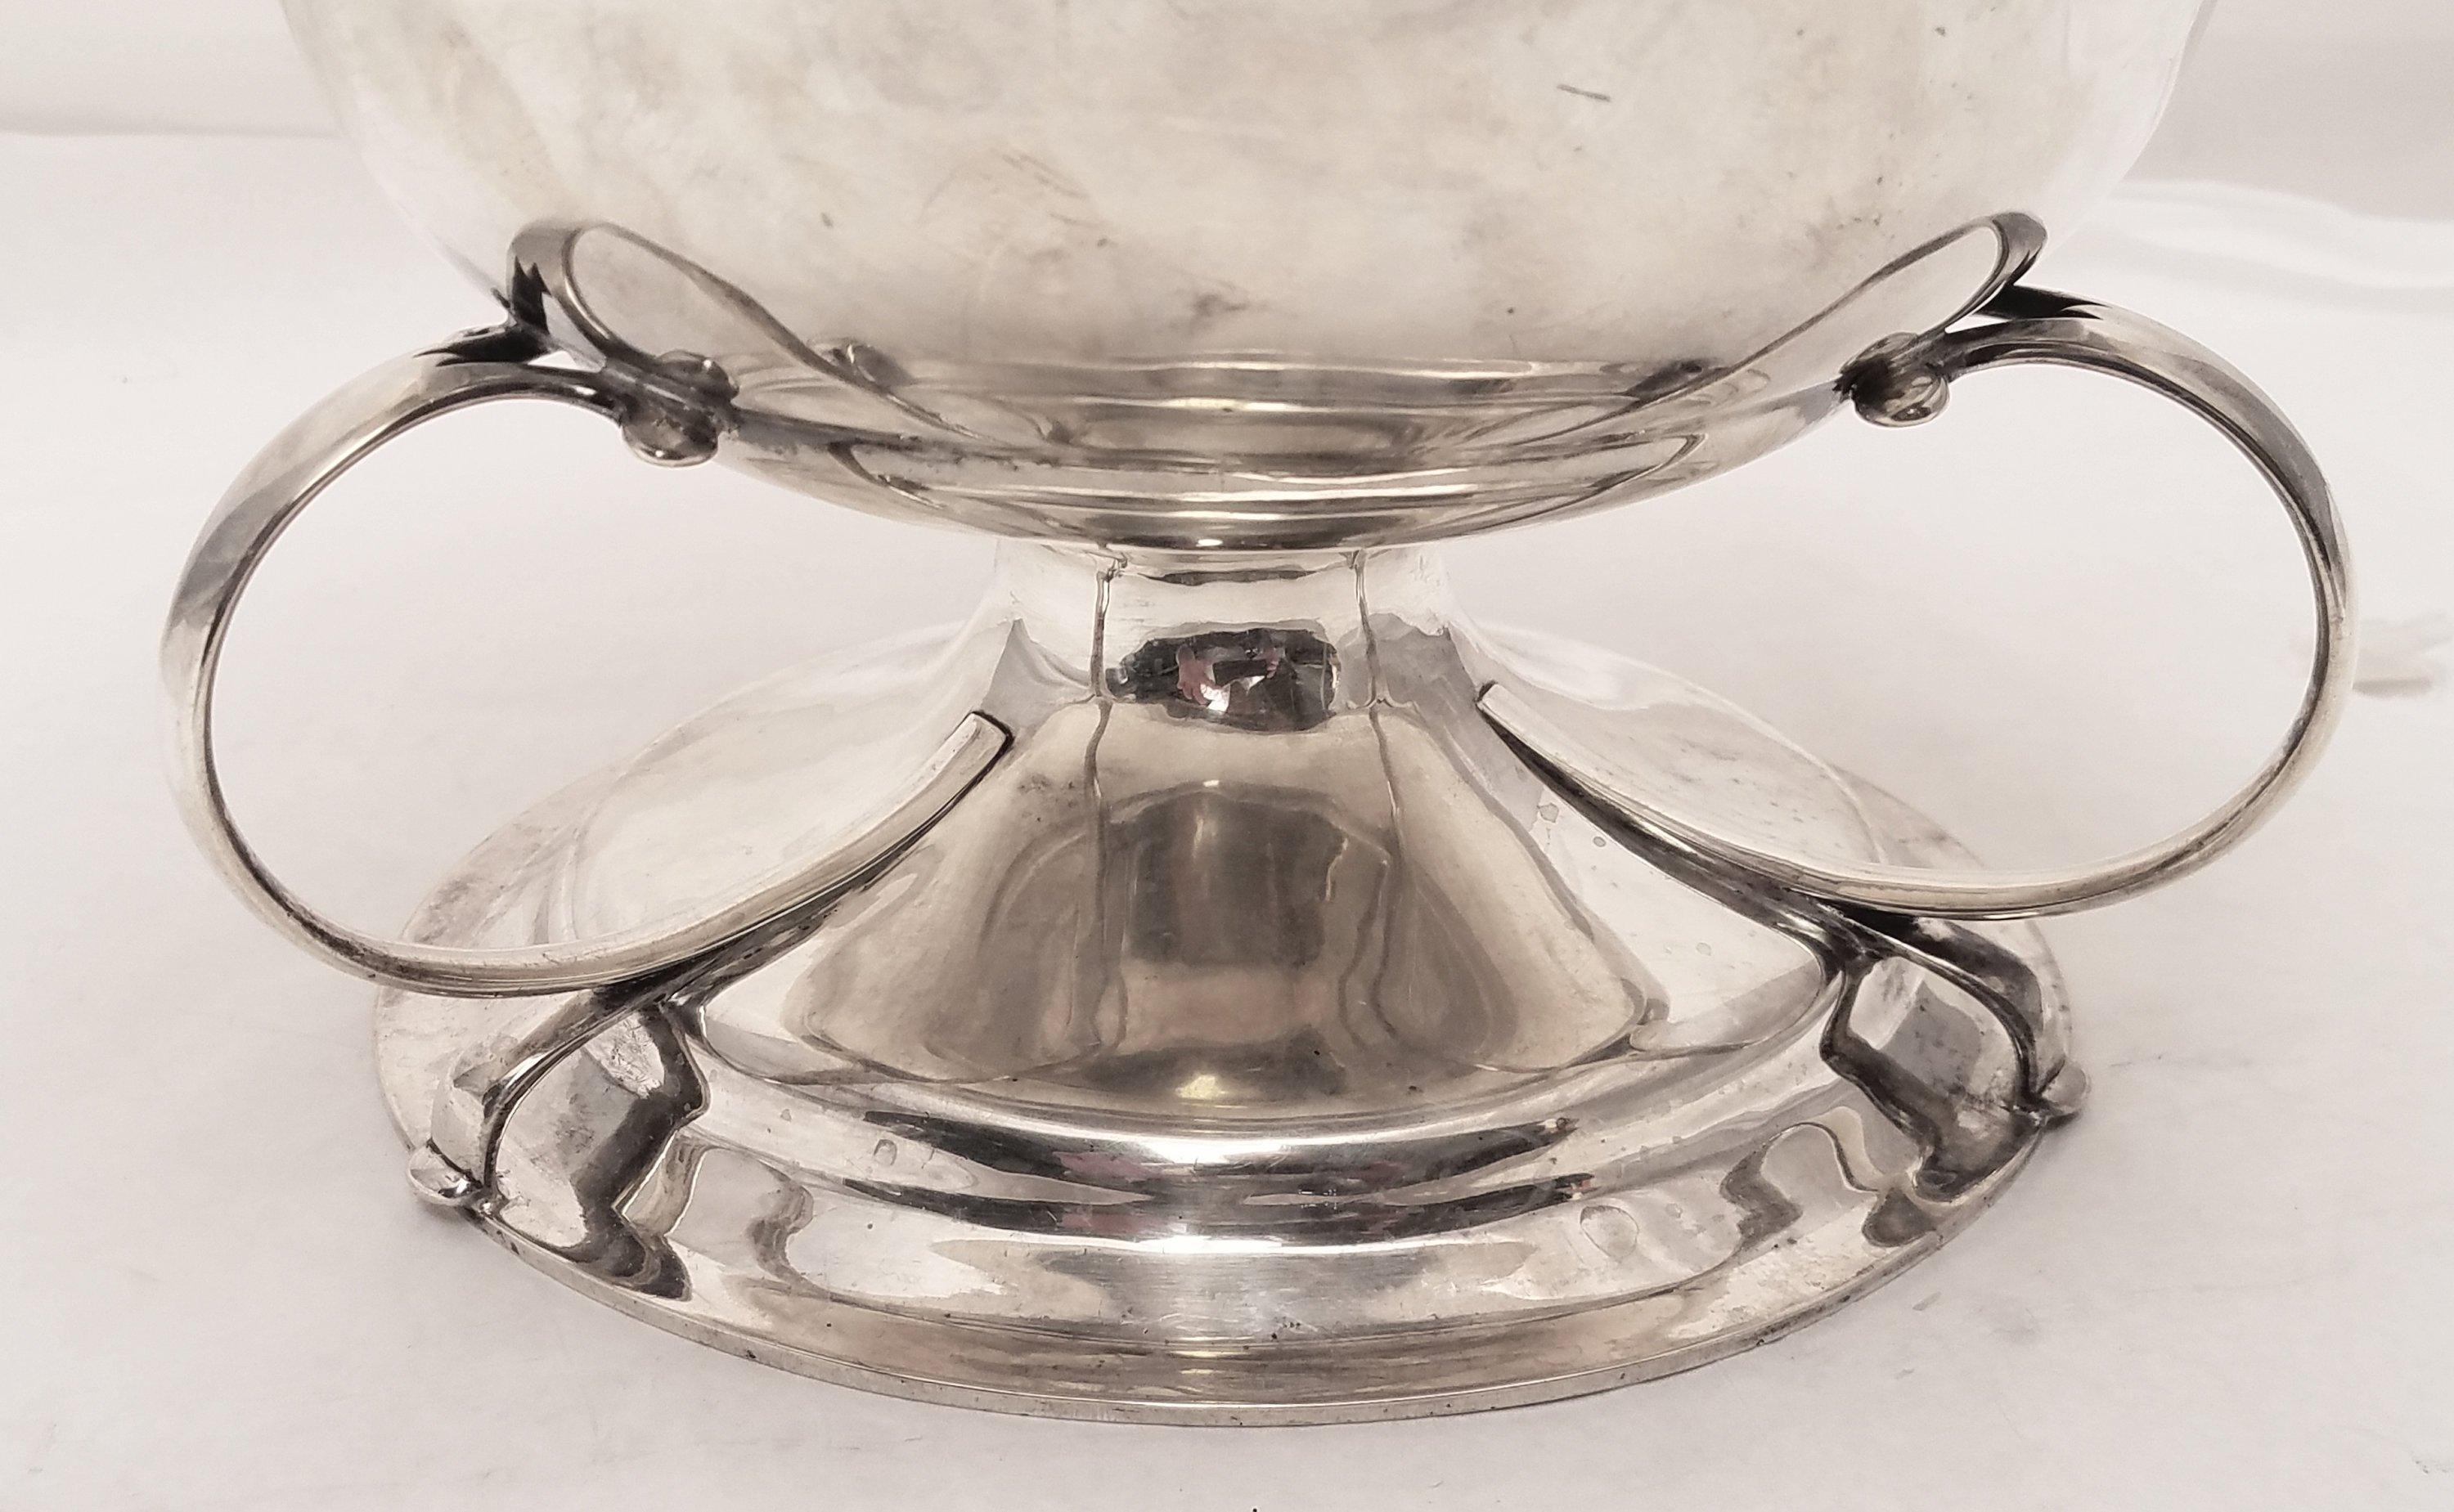 Arts and Crafts sterling silver 3-handled centerpiece / serving bowl, standing on a grounded pedestal base. Made by James Woolley, this beautiful centerpiece will do wonders for any holiday table setting! Measurements: 6.5 inches high, by 10.25